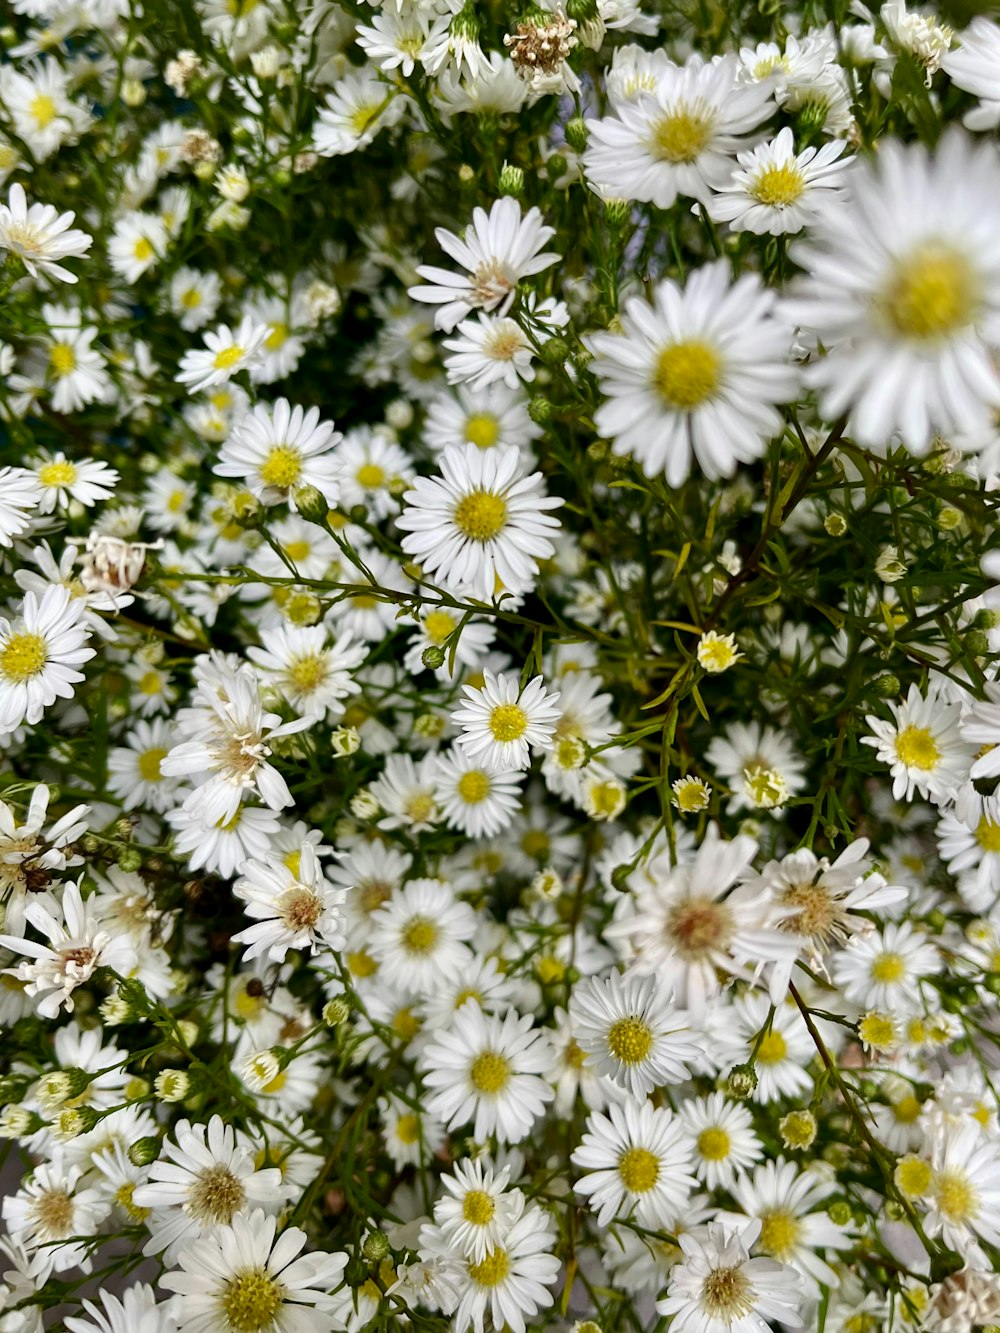 a bunch of white flowers with yellow centers